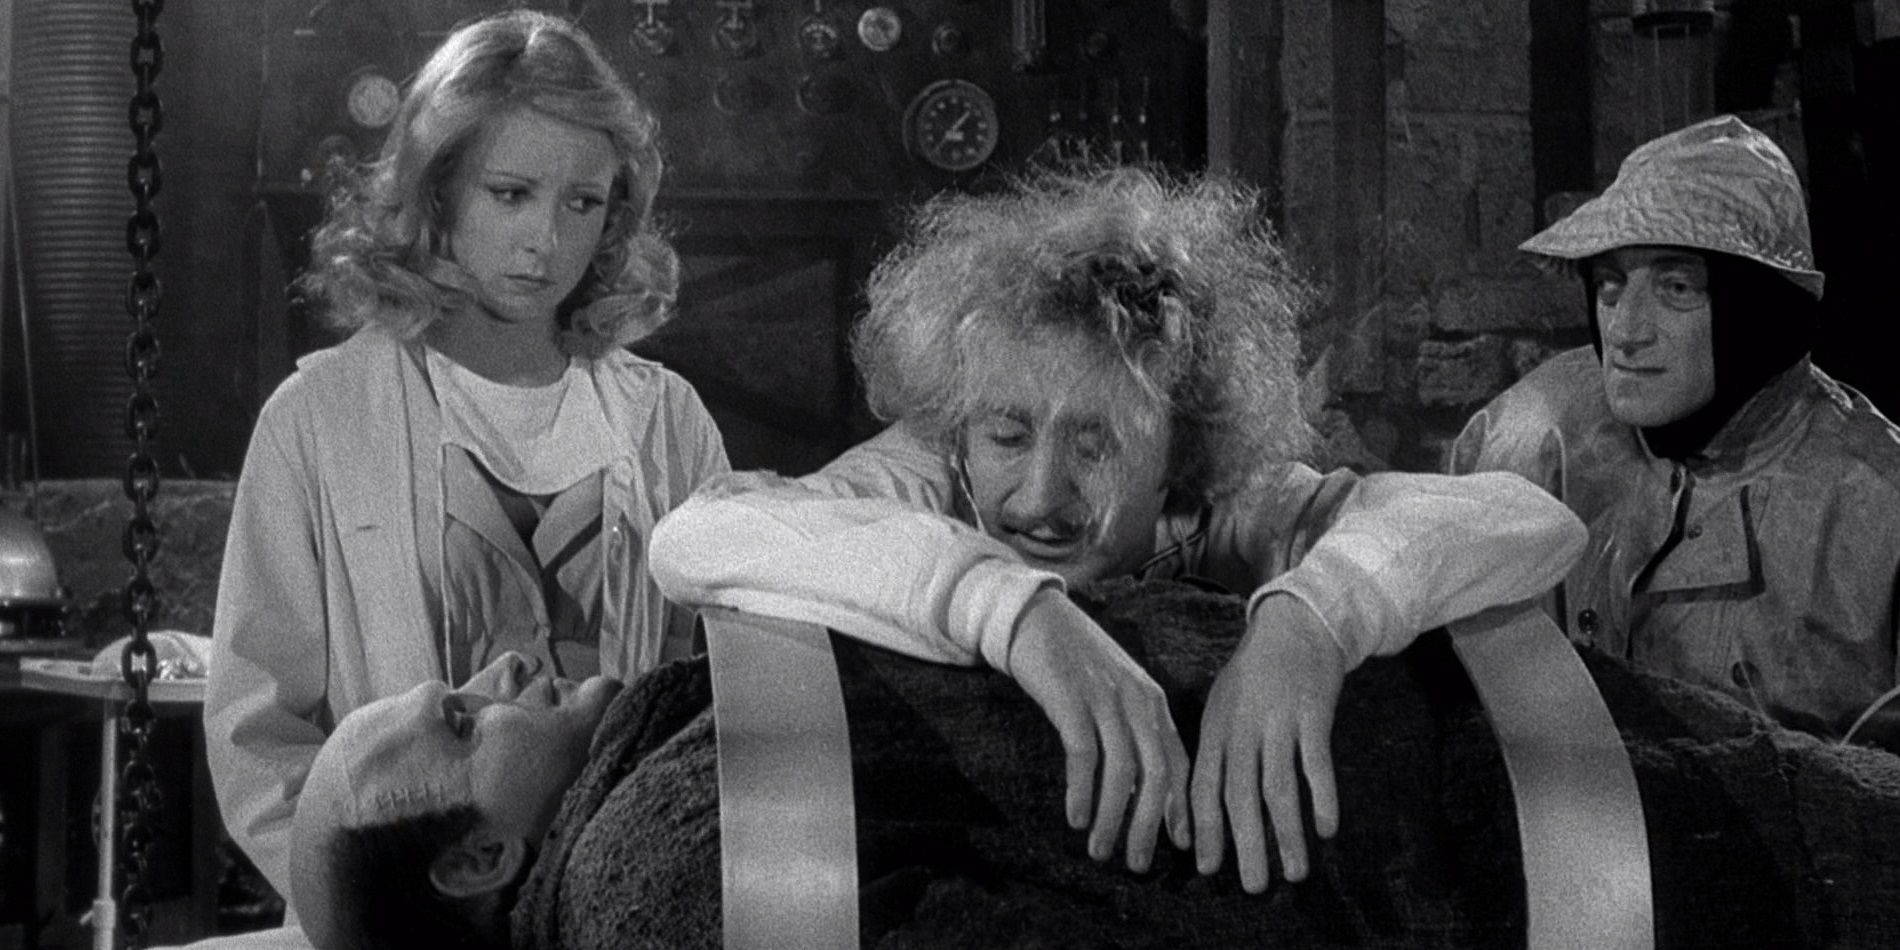 Freddy, Elizabeth, Igor, and the monster in Young Frankenstein